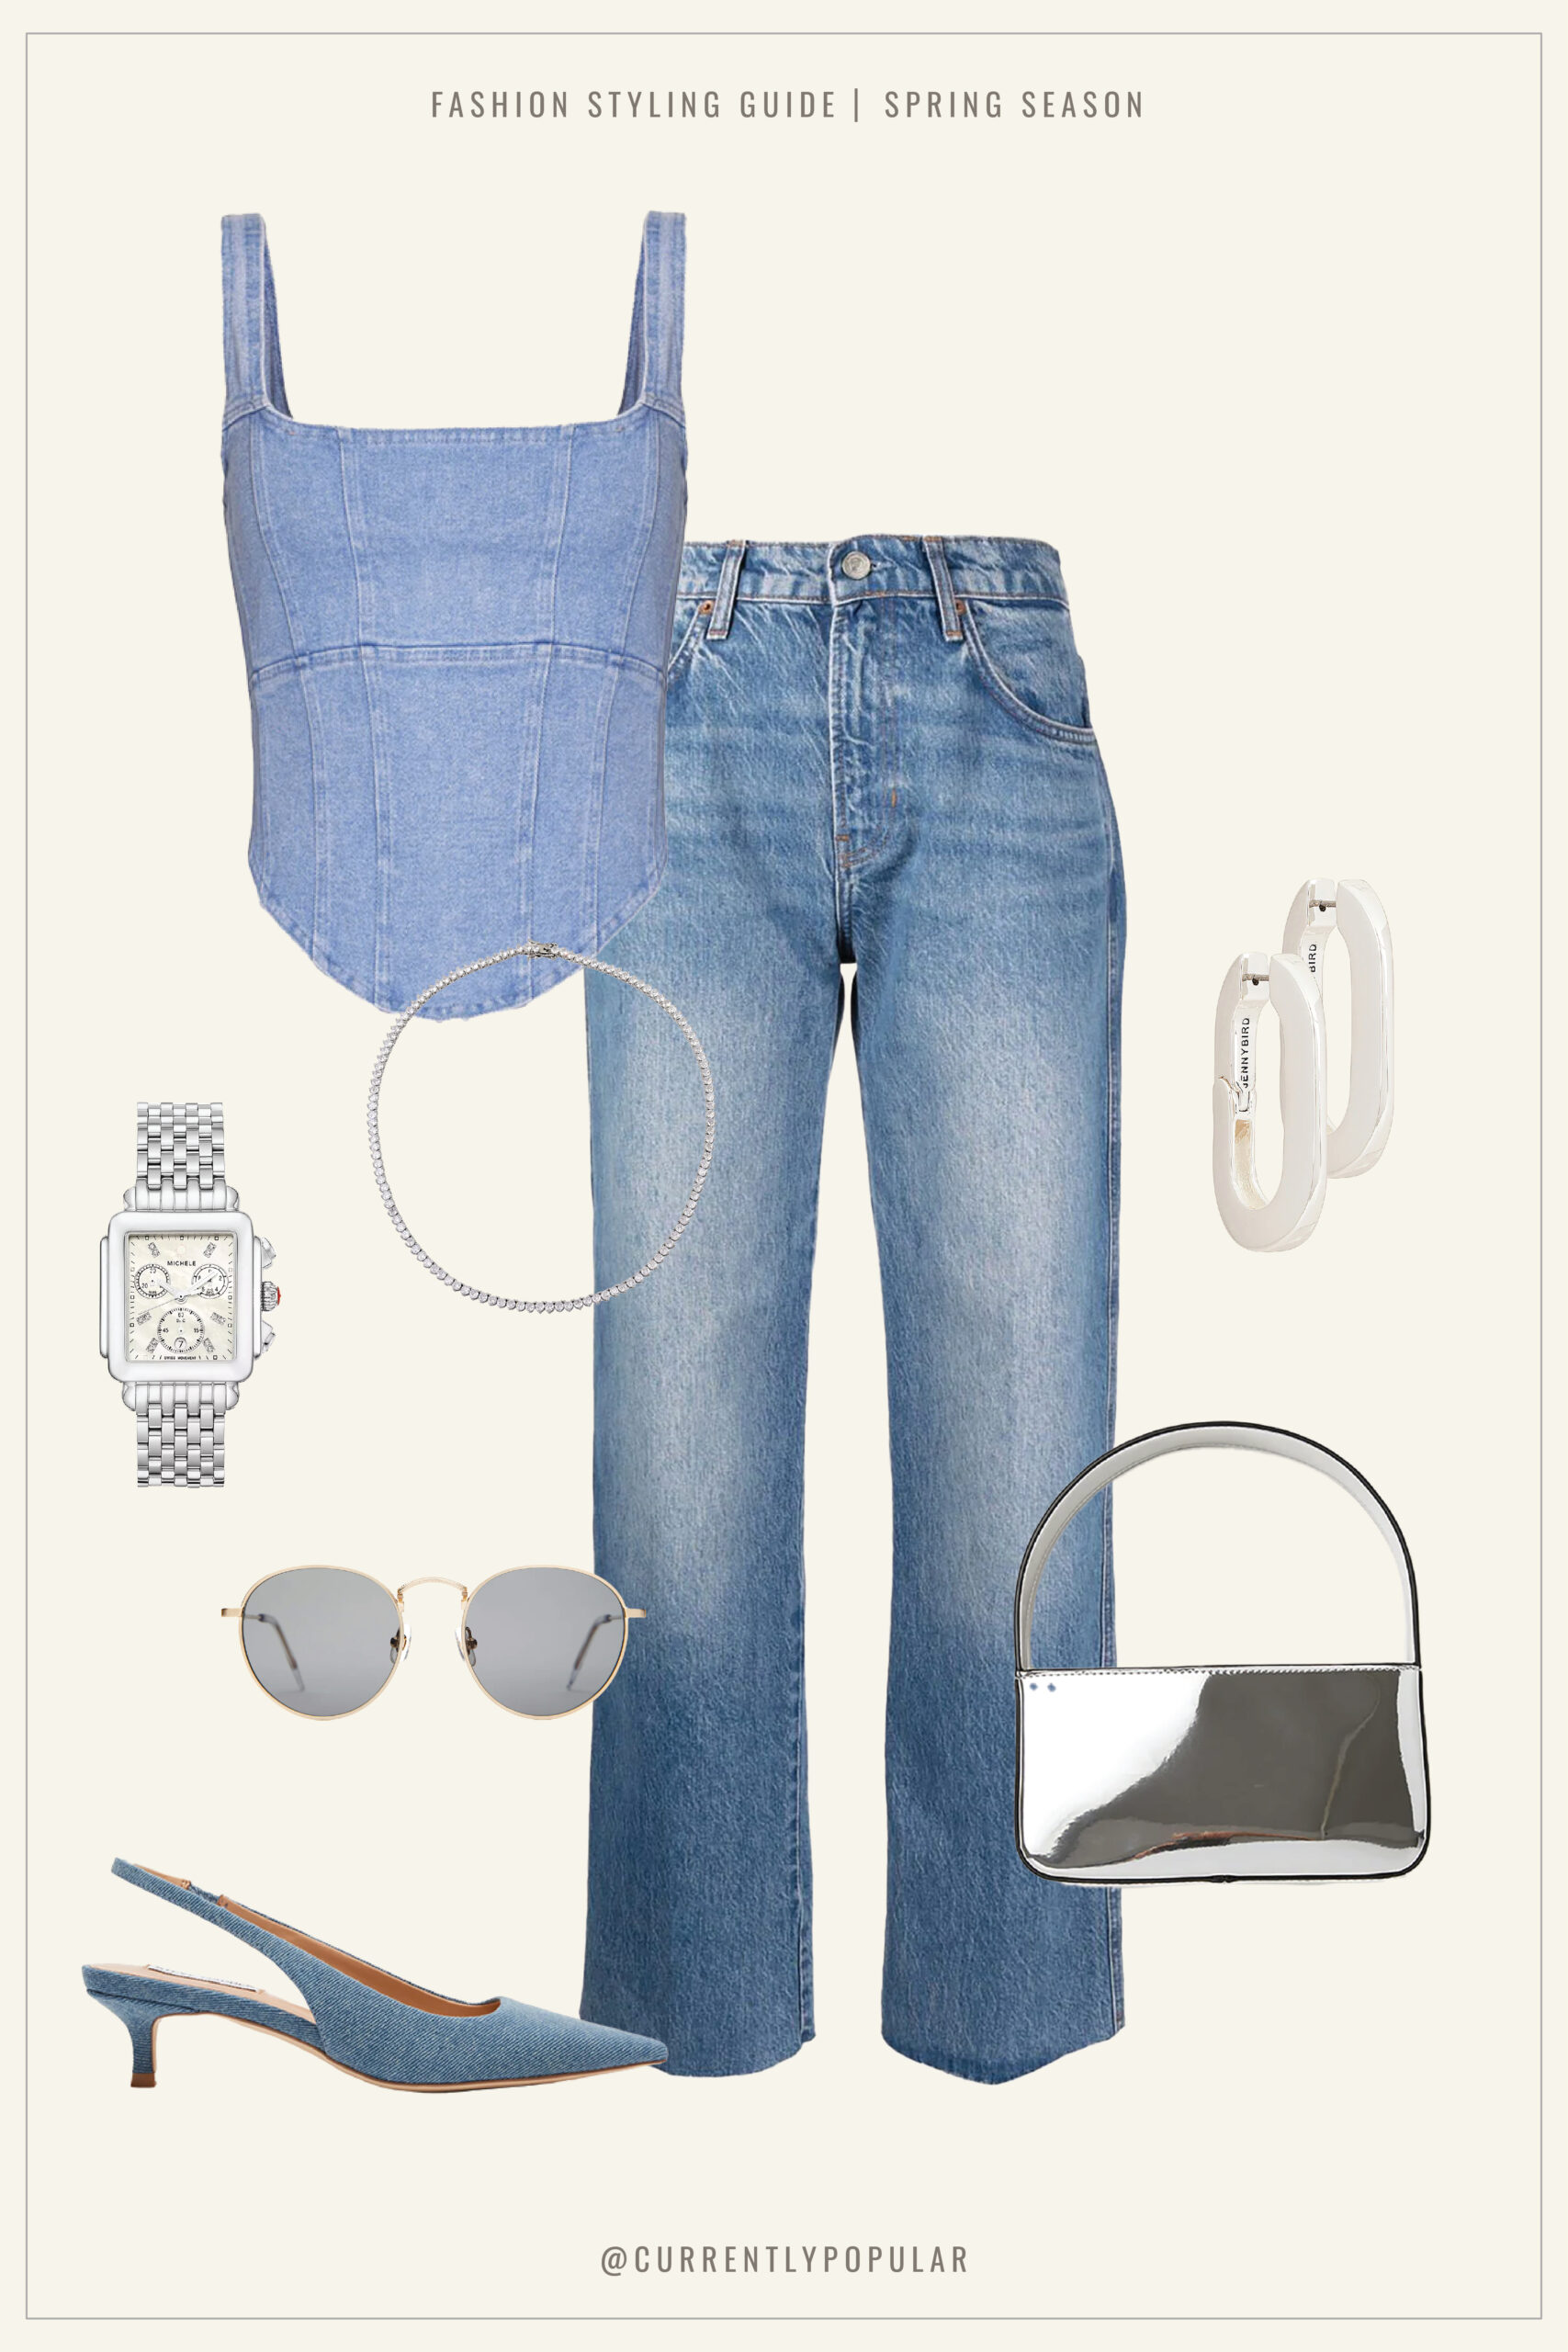 An image showcasing a spring fashion ensemble with a denim corset top and wide-leg jeans, accessorized with a silver wristwatch, silver hoop earrings, round metal-frame sunglasses, and denim kitten heels. A metallic silver handbag completes the look, offering a modern twist on the classic double-denim outfit. Perfect for a chic daytime event.